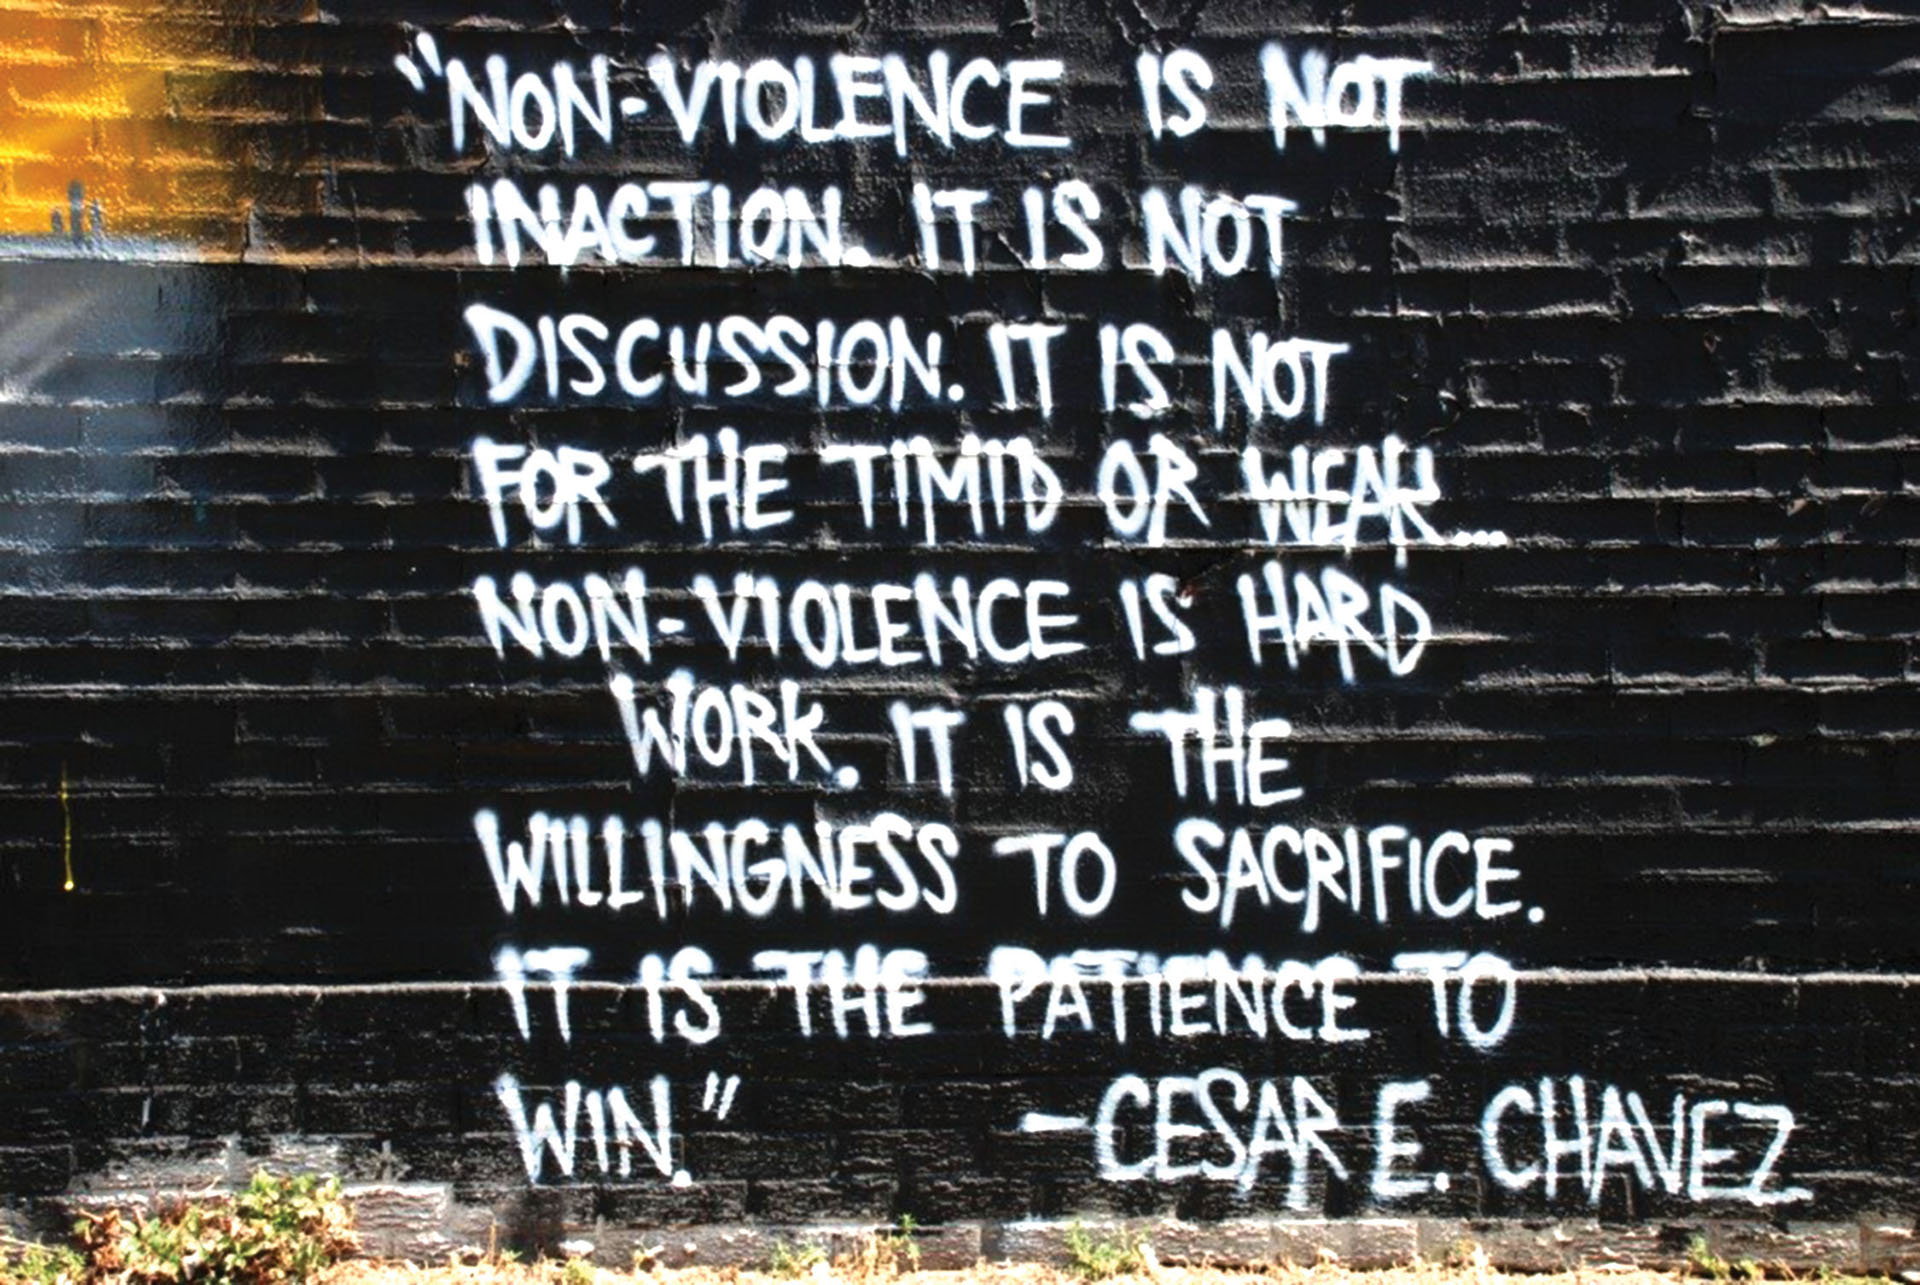 A mural in Denver with a quote from Cesar Chavez about the bravery and patience of non-violence. (Photo by Joe Beine.)